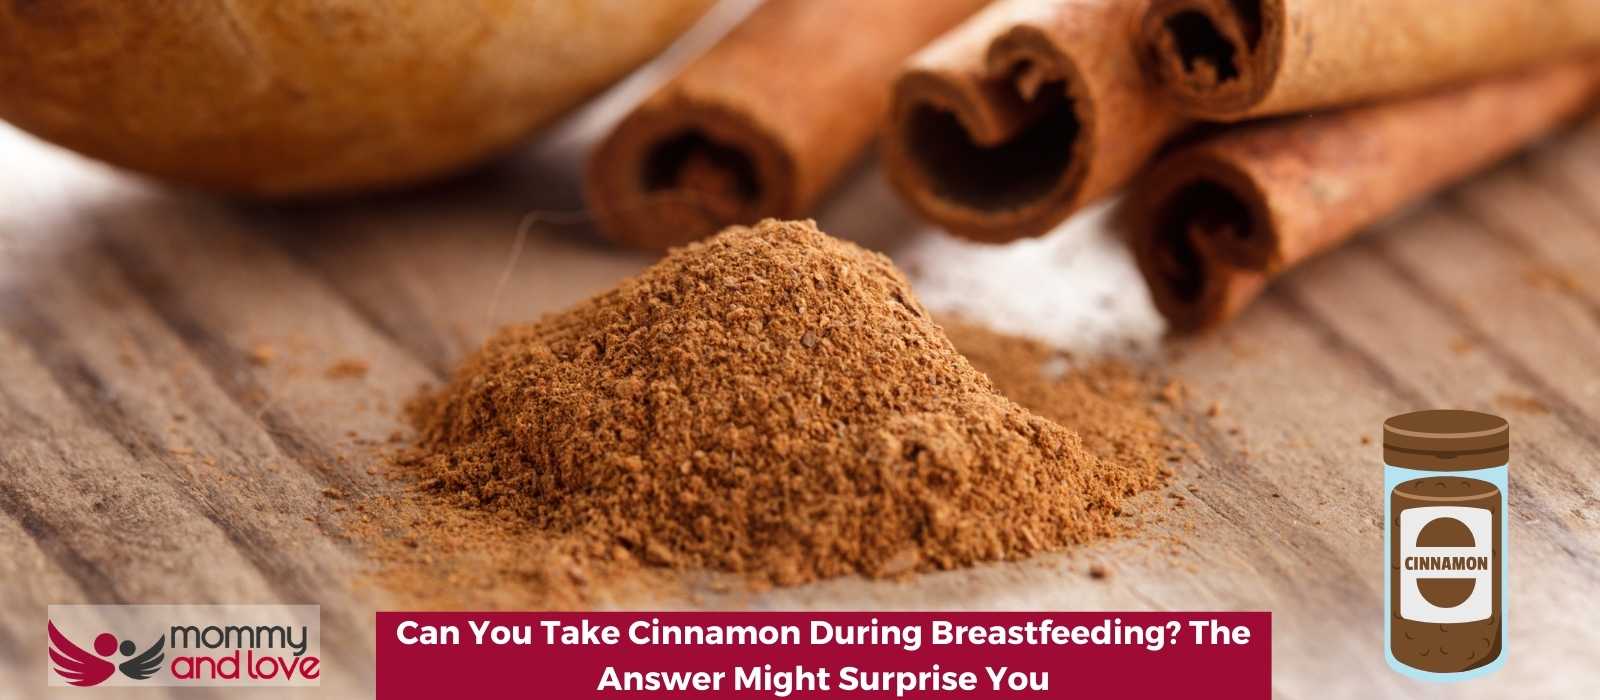 Can You Take Cinnamon During Breastfeeding? The Answer Might Surprise You